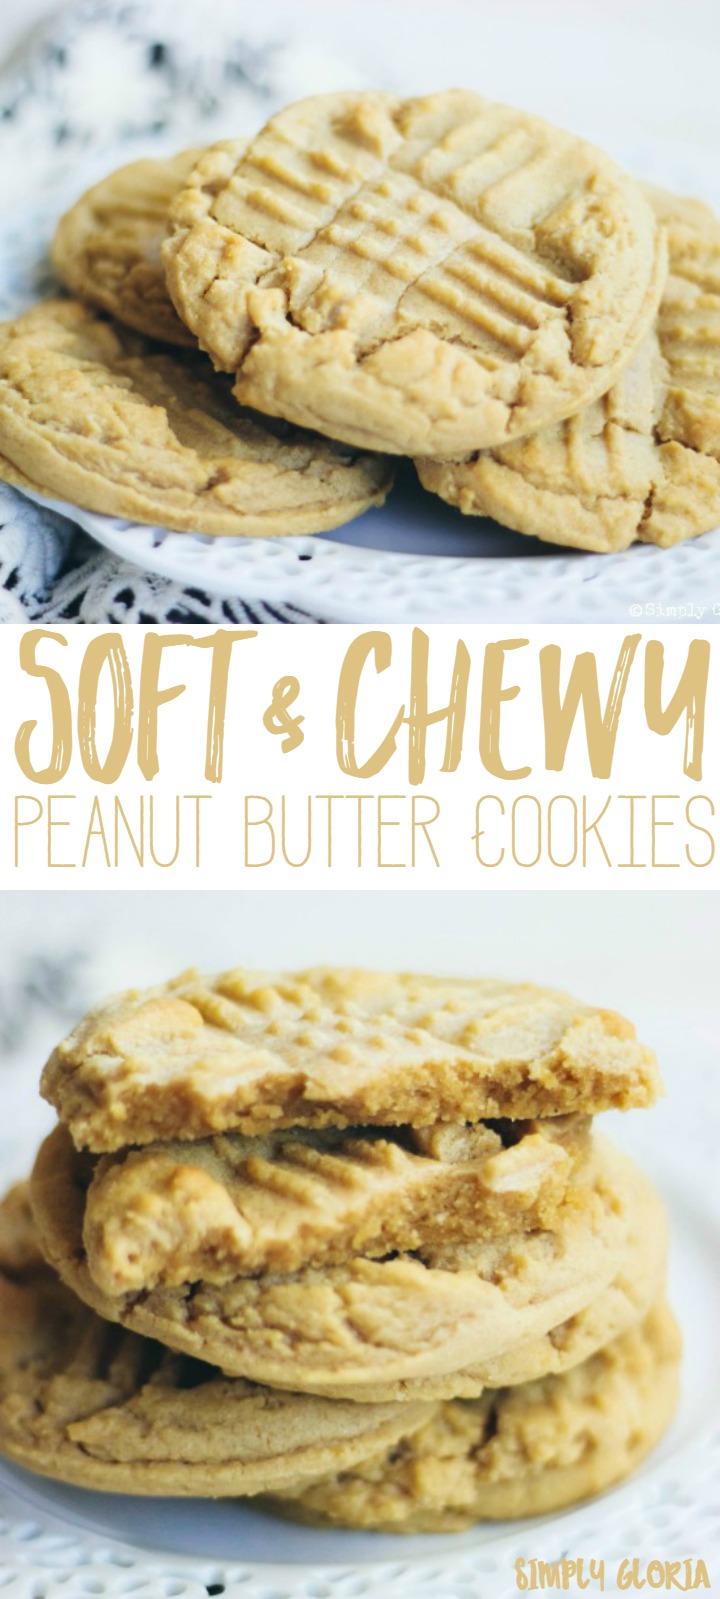 Soft and Chewy Peanut Butter Cookies will rock your world!